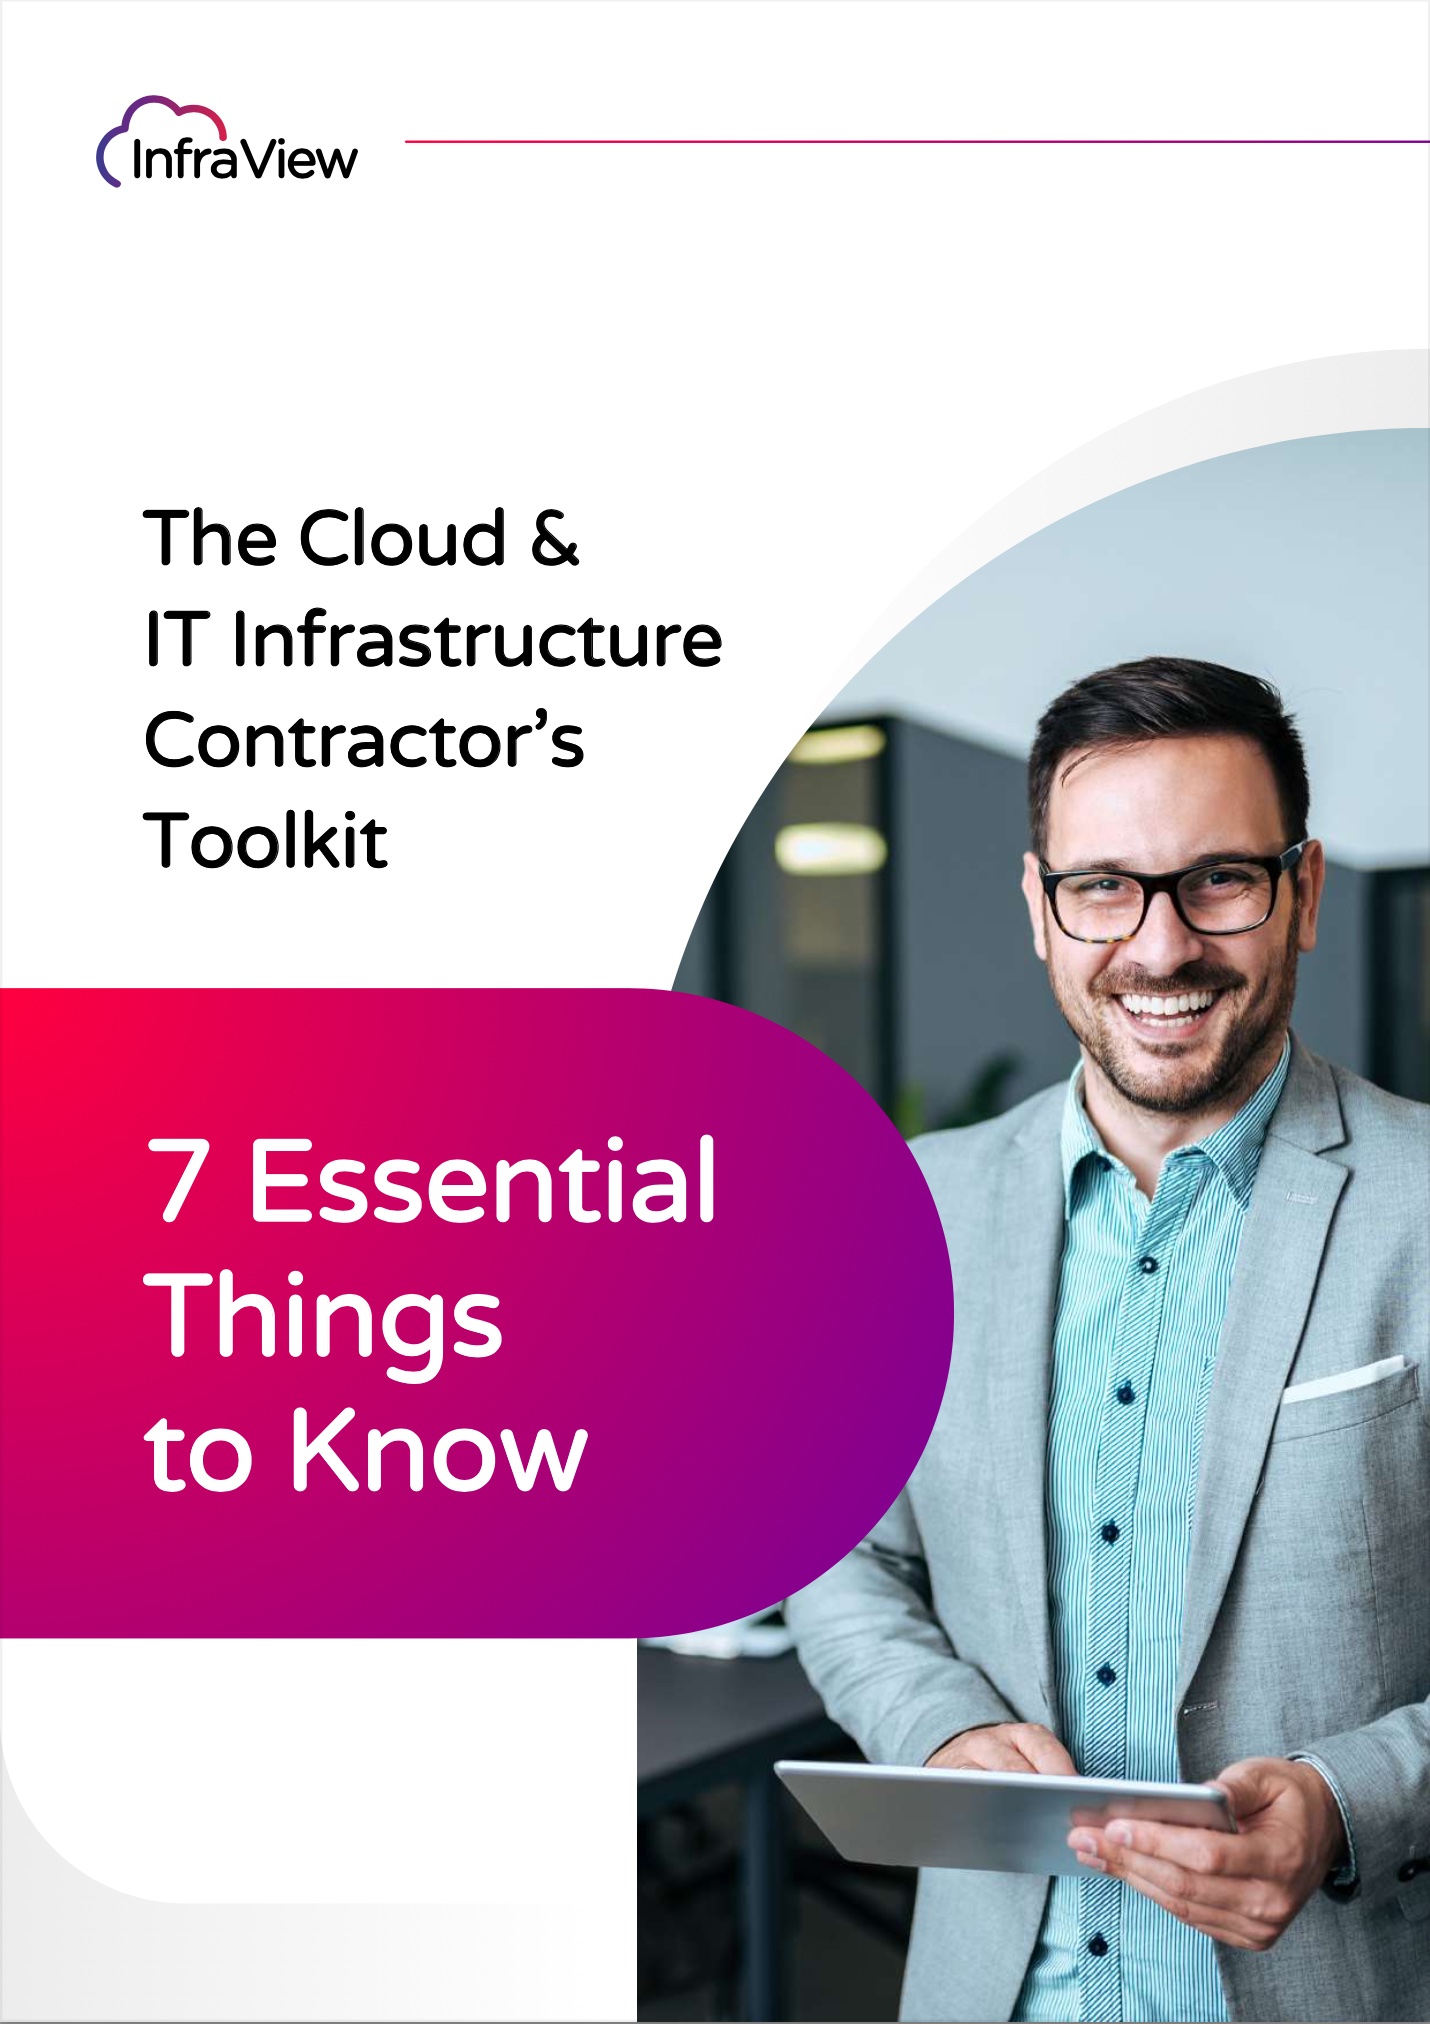 The Cloud & IT Infrastructure Contractor’s Toolkit